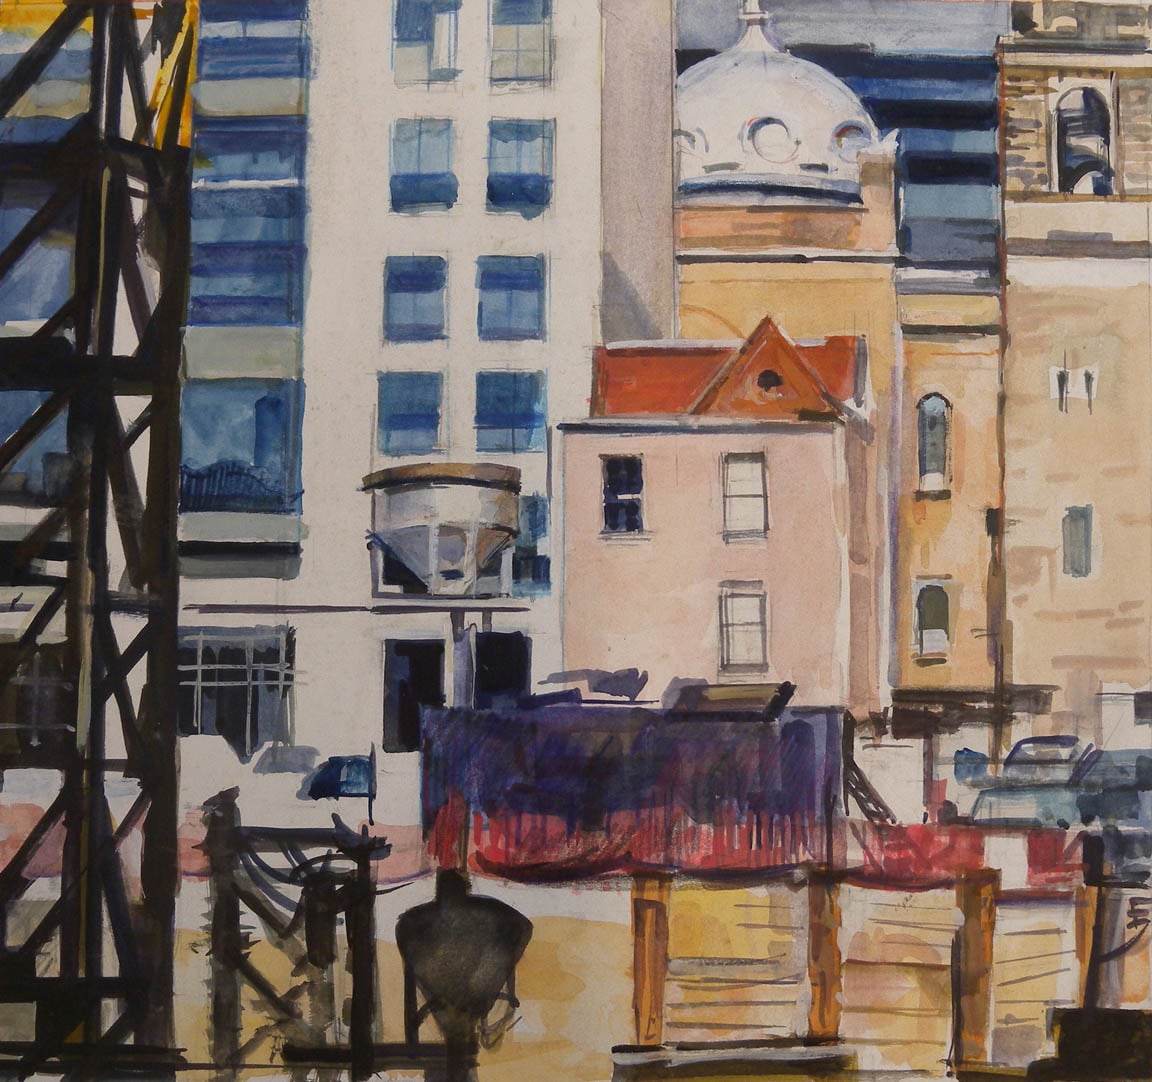  Dome and Construction, watercolor on paper, 13" x 14" &nbsp; &nbsp; &nbsp; &nbsp; &nbsp; &nbsp; &nbsp; &nbsp; &nbsp; &nbsp; &nbsp; &nbsp; &nbsp; &nbsp; &nbsp; &nbsp;Phillips Collection, Washington, DC 